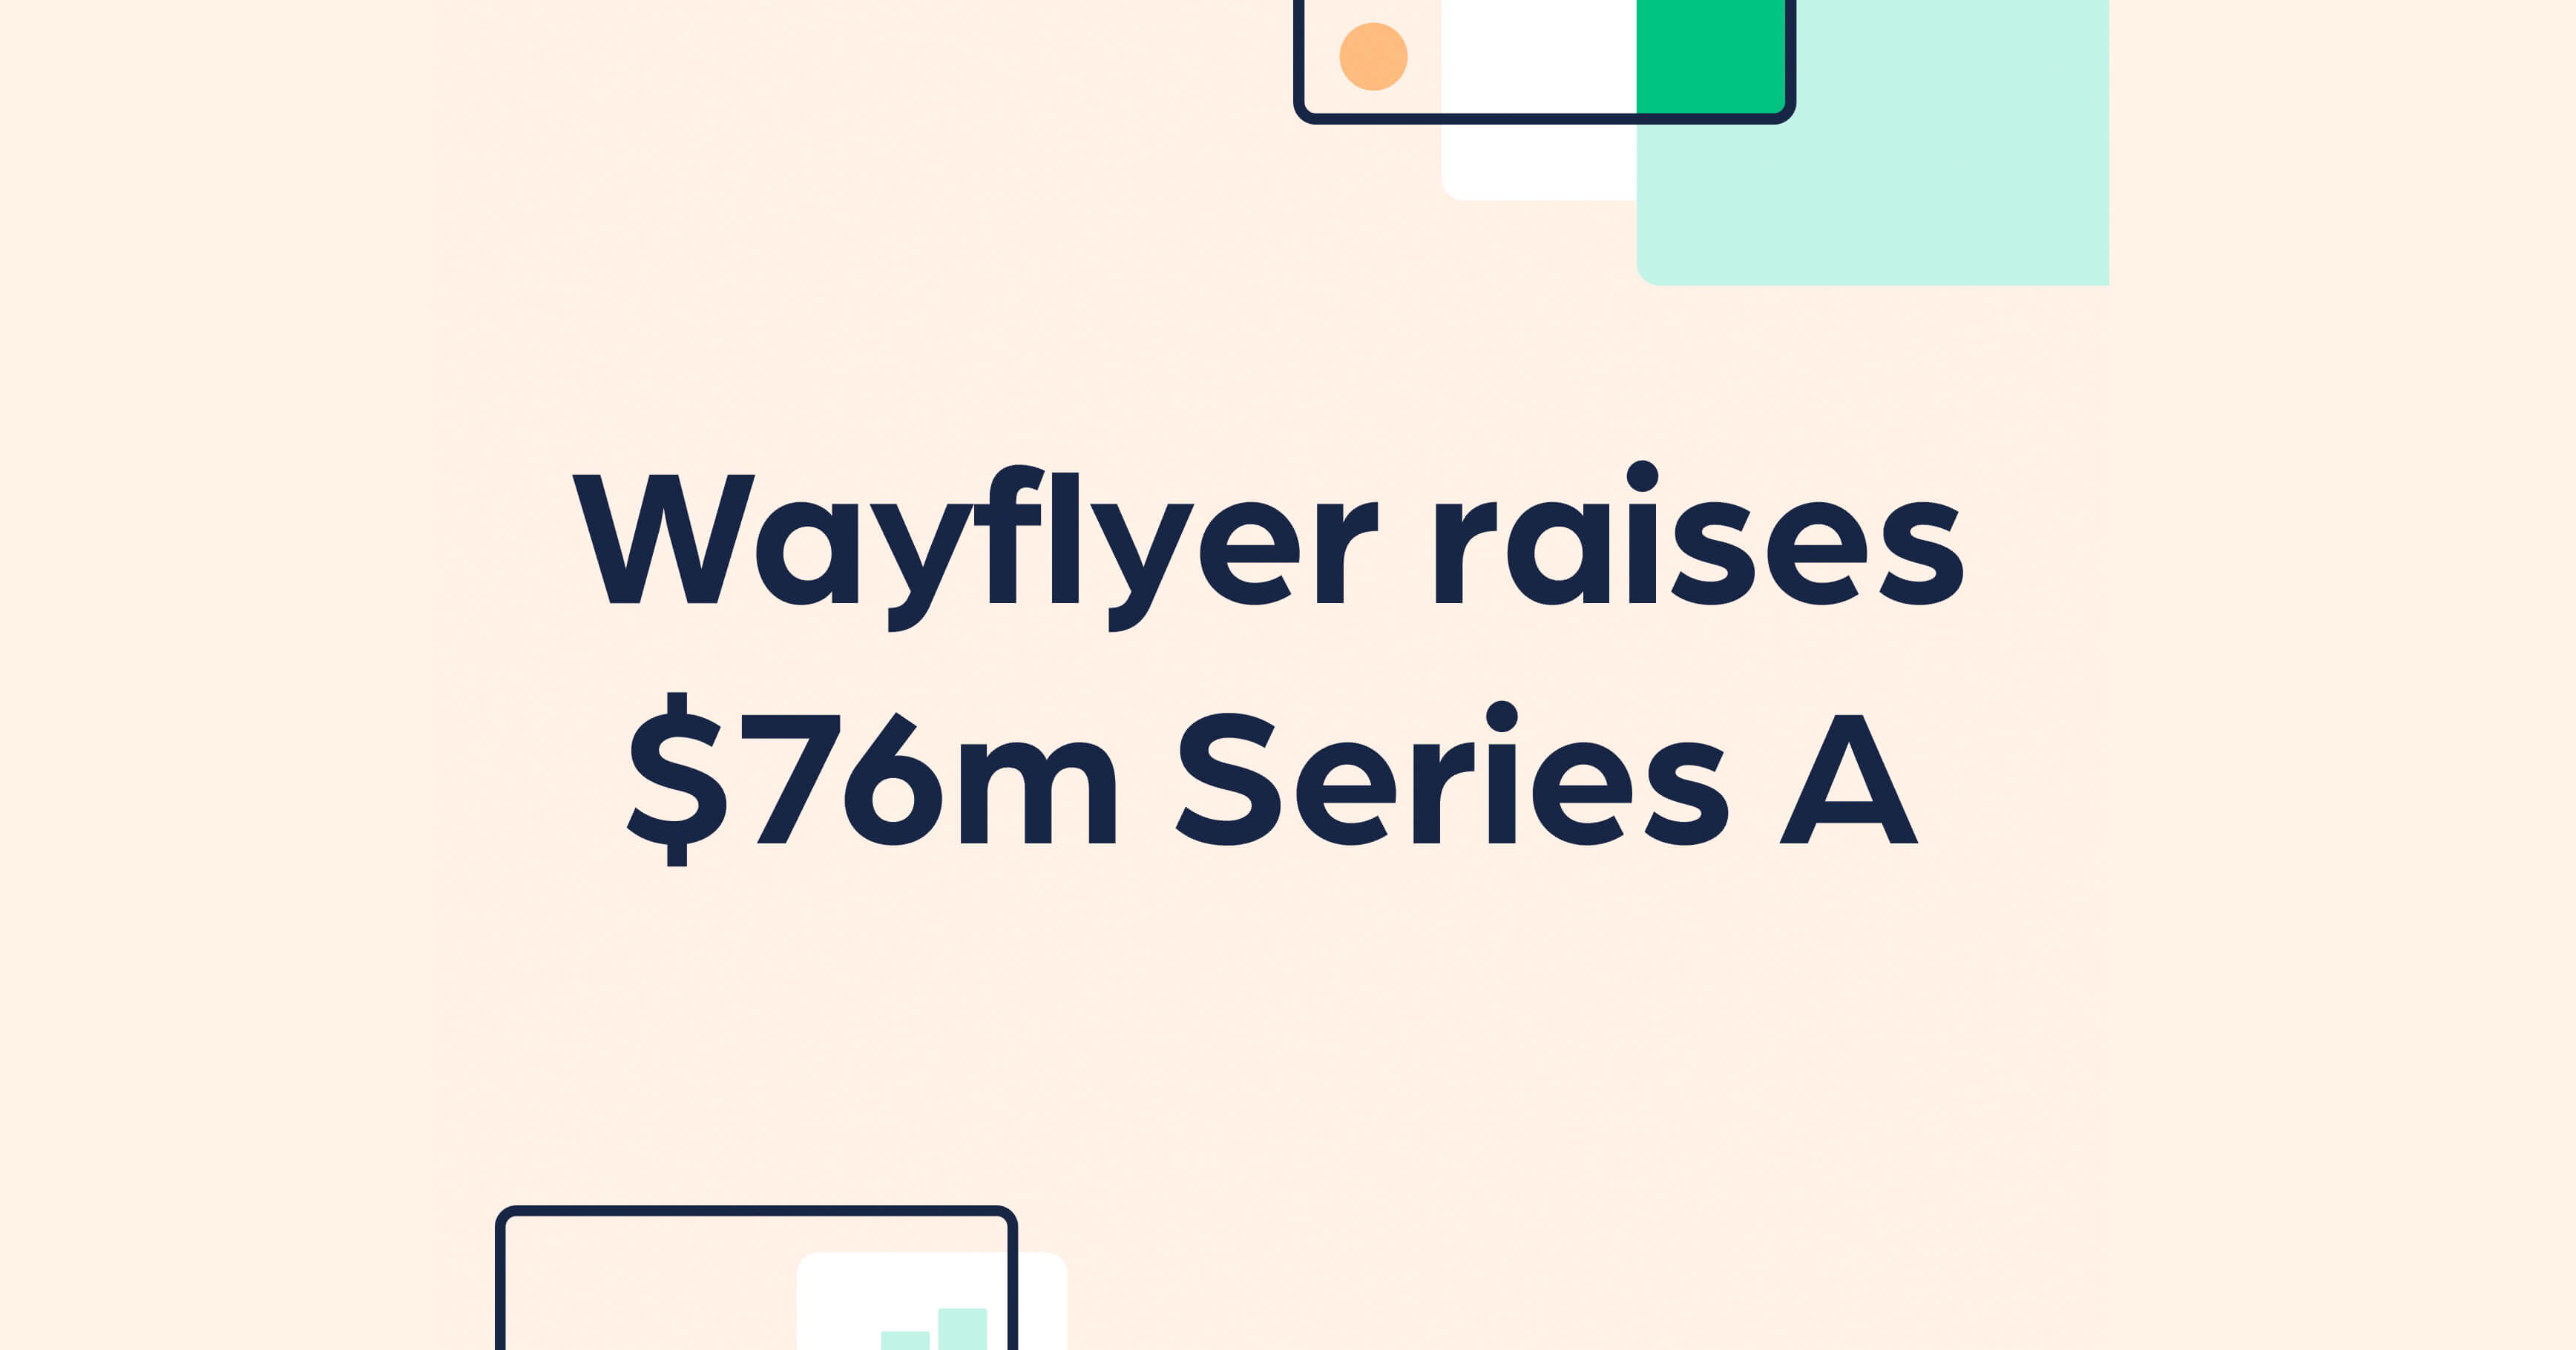 Announcing our $76m Series A